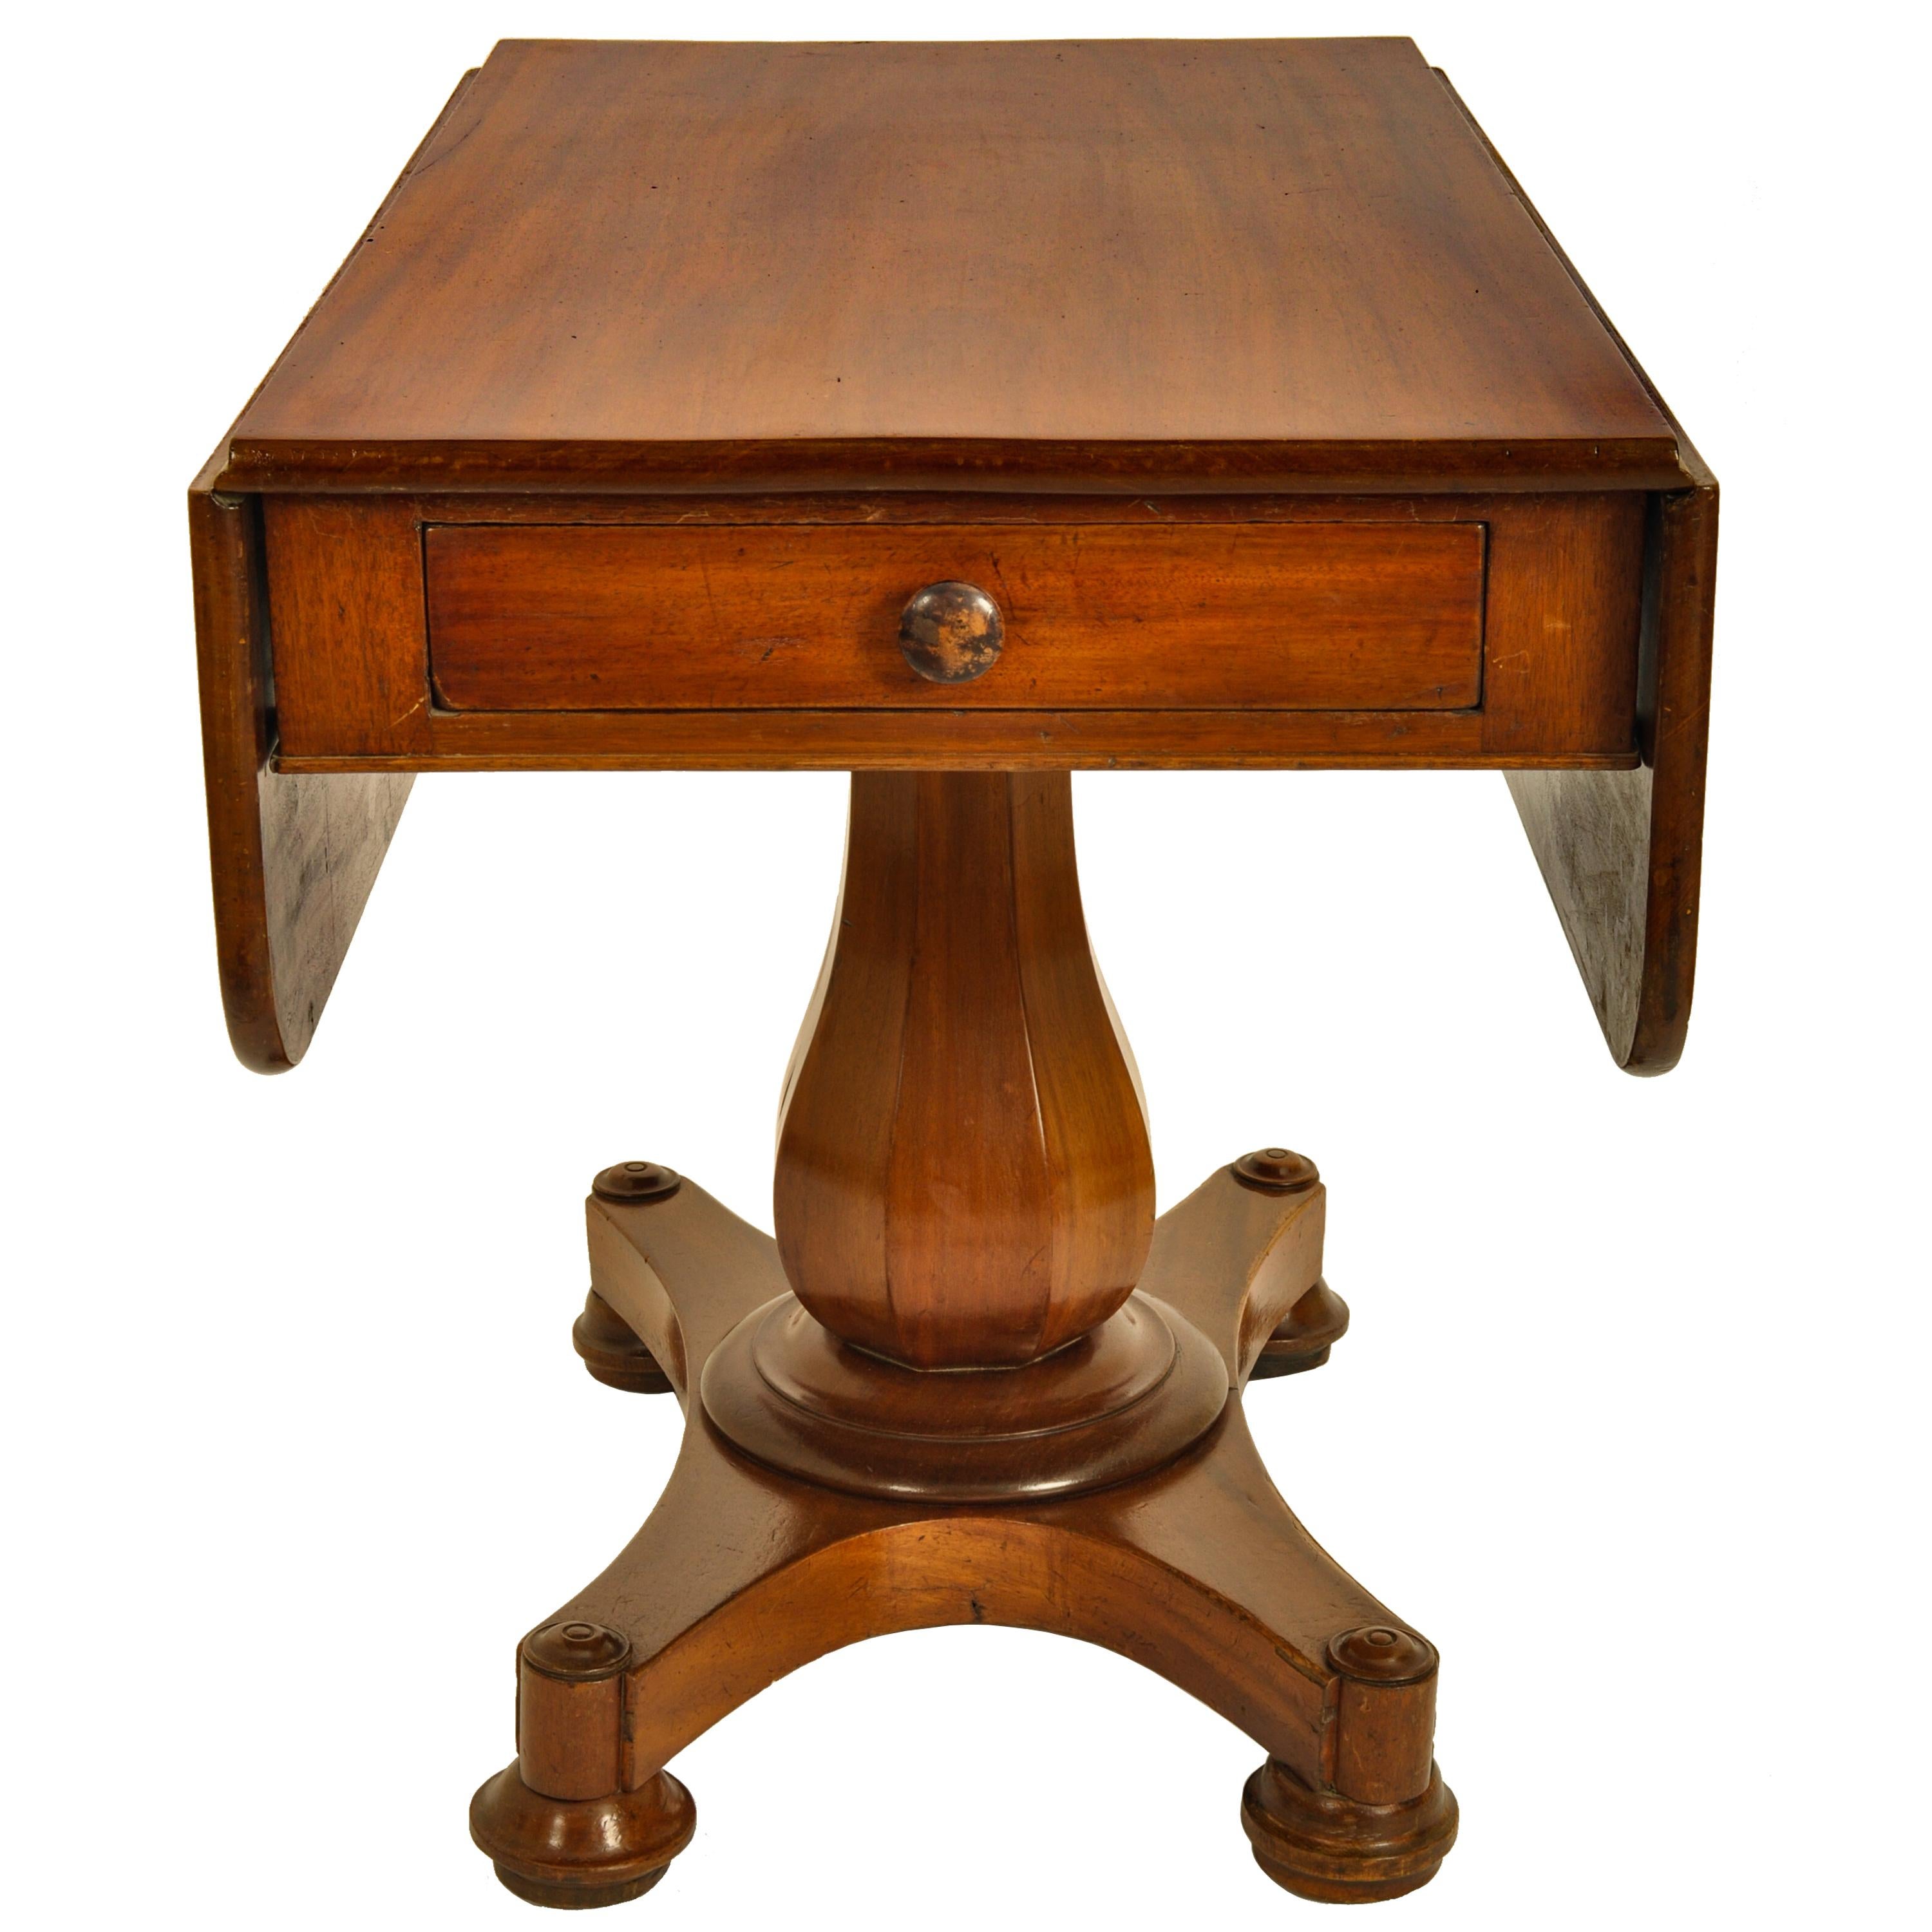 American Classical Antique American Empire Mahogany Drop Leaf Pedestal Pembroke Table Maryland 1840 For Sale